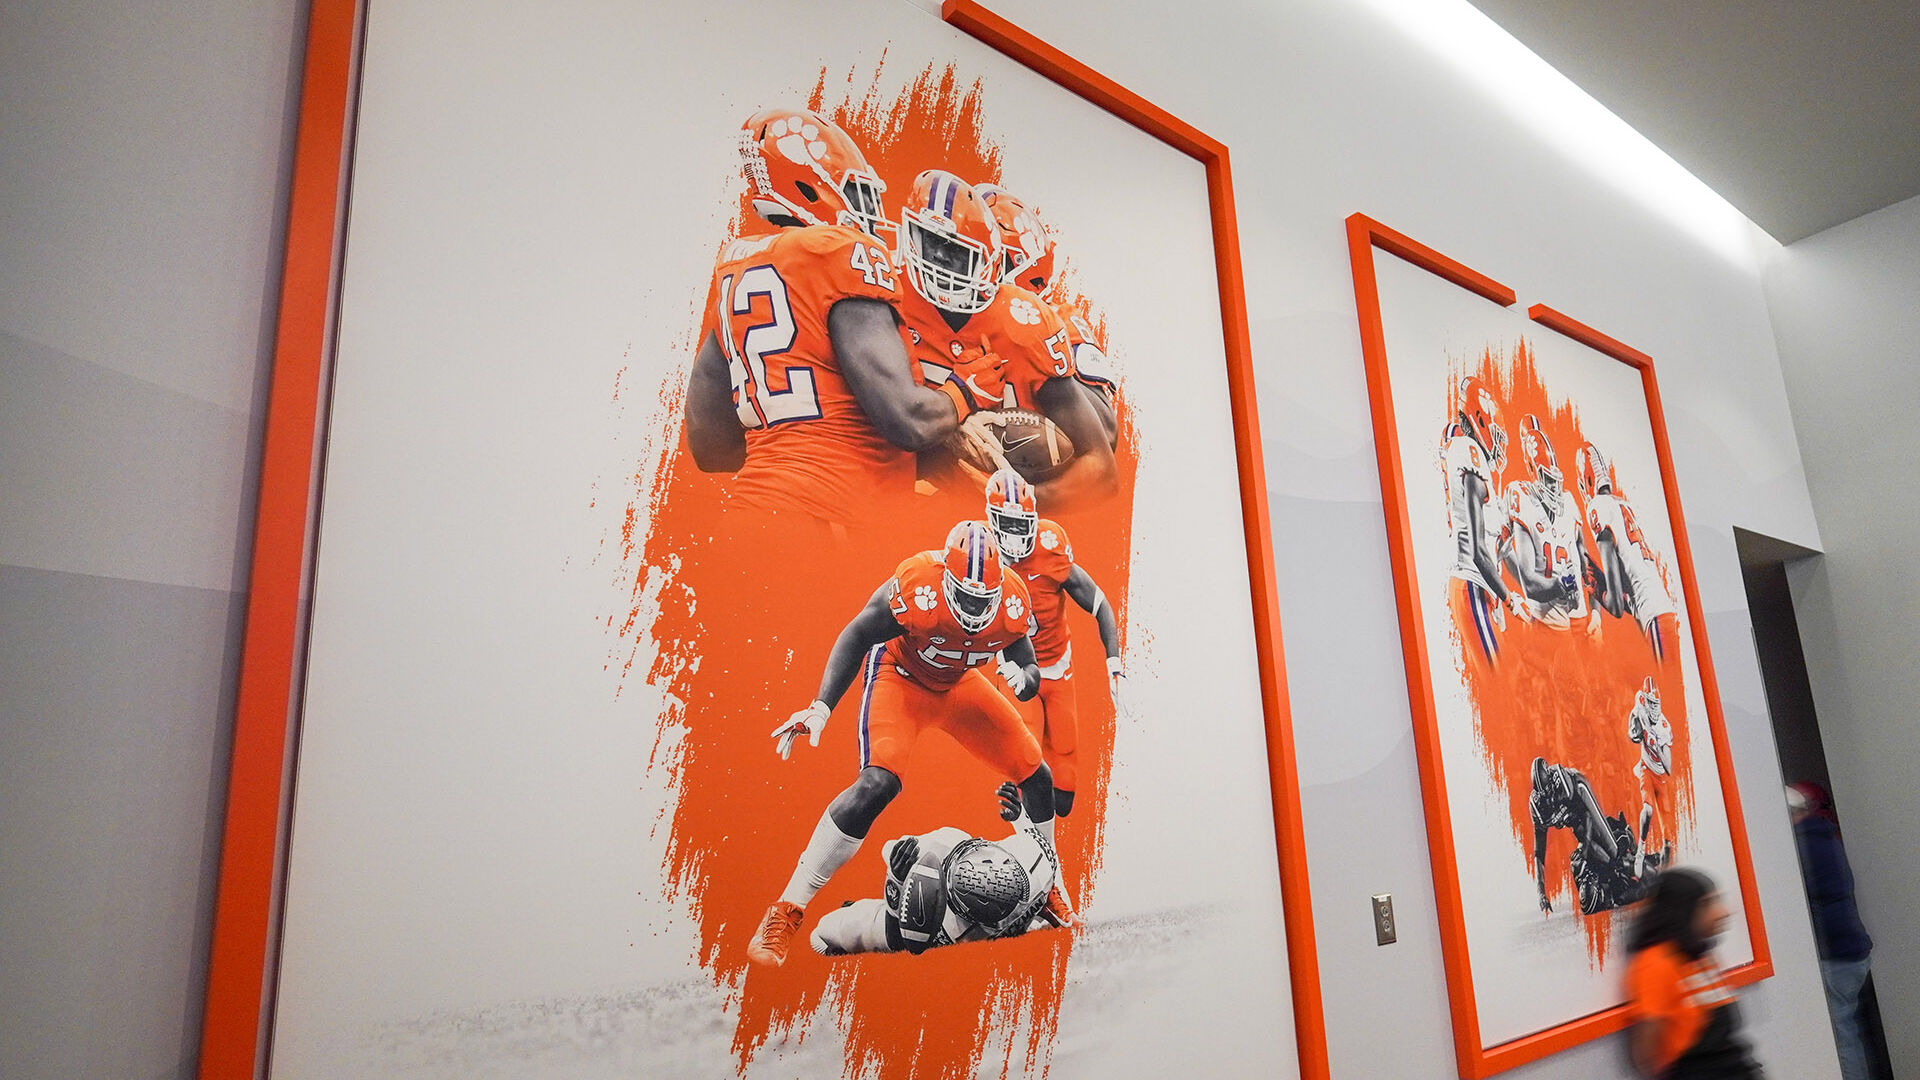 Framed Wall Graphics of Clemson Football Players at Clemson's Masters Club